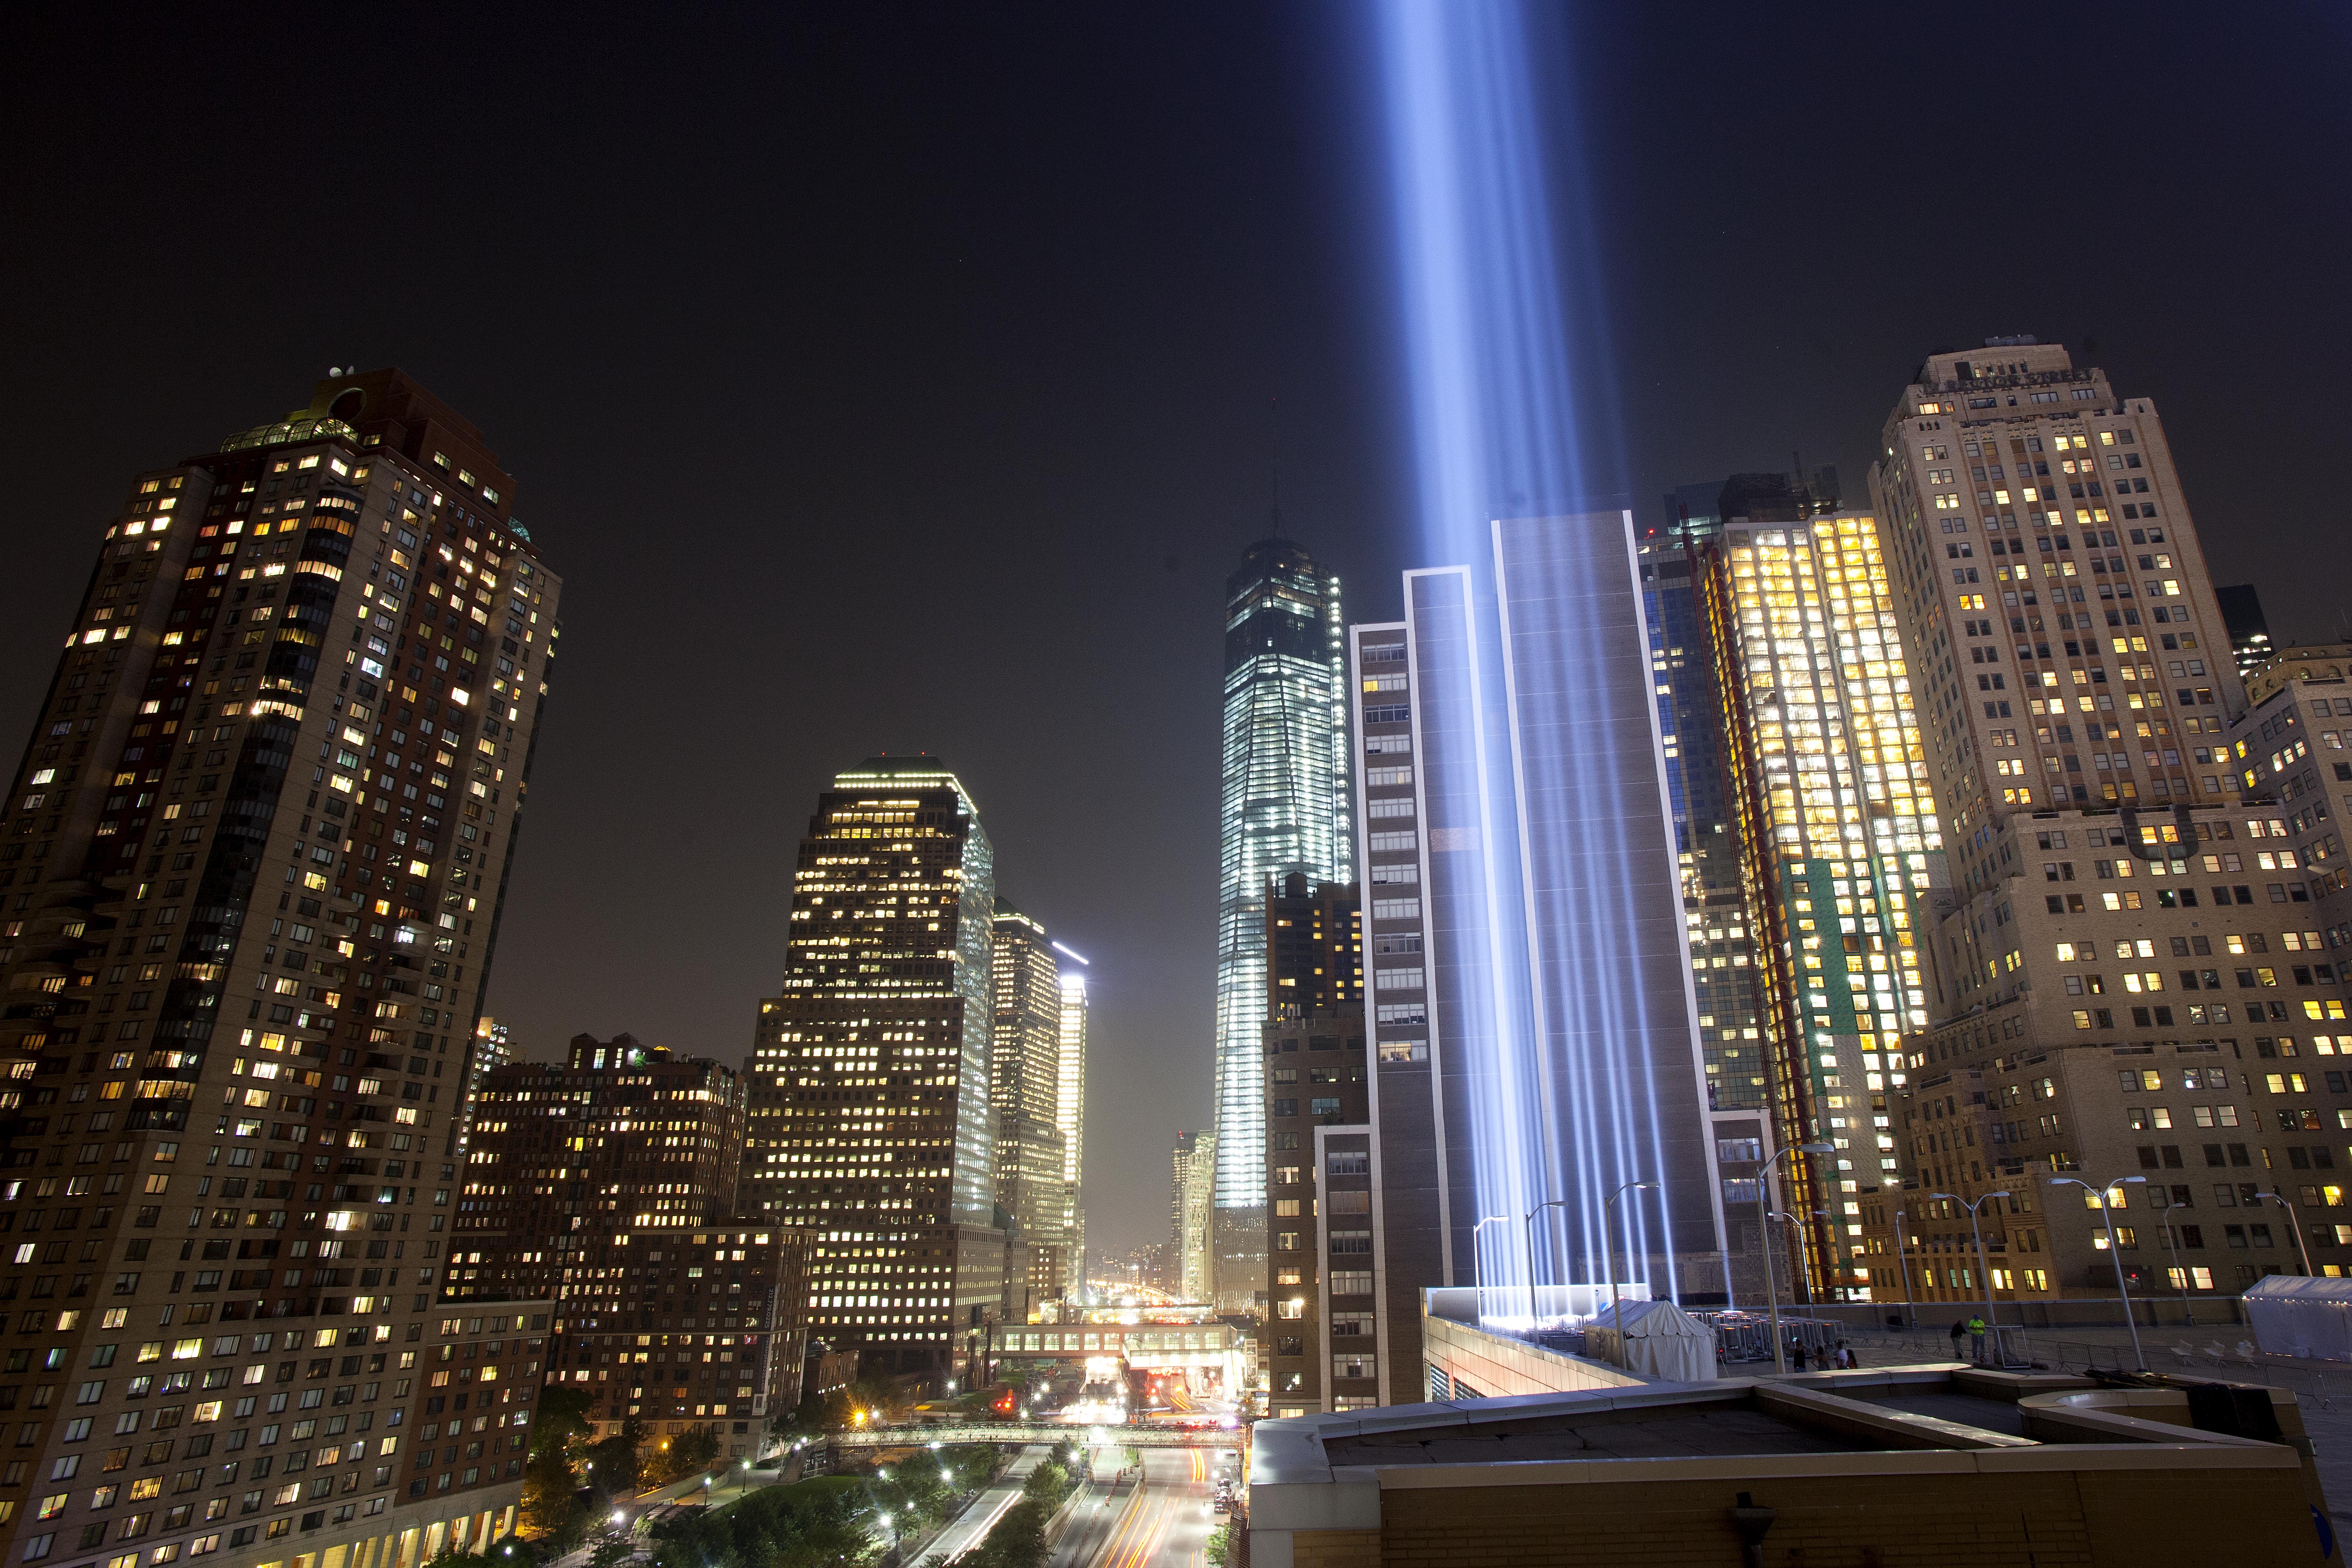 Gallery Twin Towers Of Light Shine Over New York On Anniversary